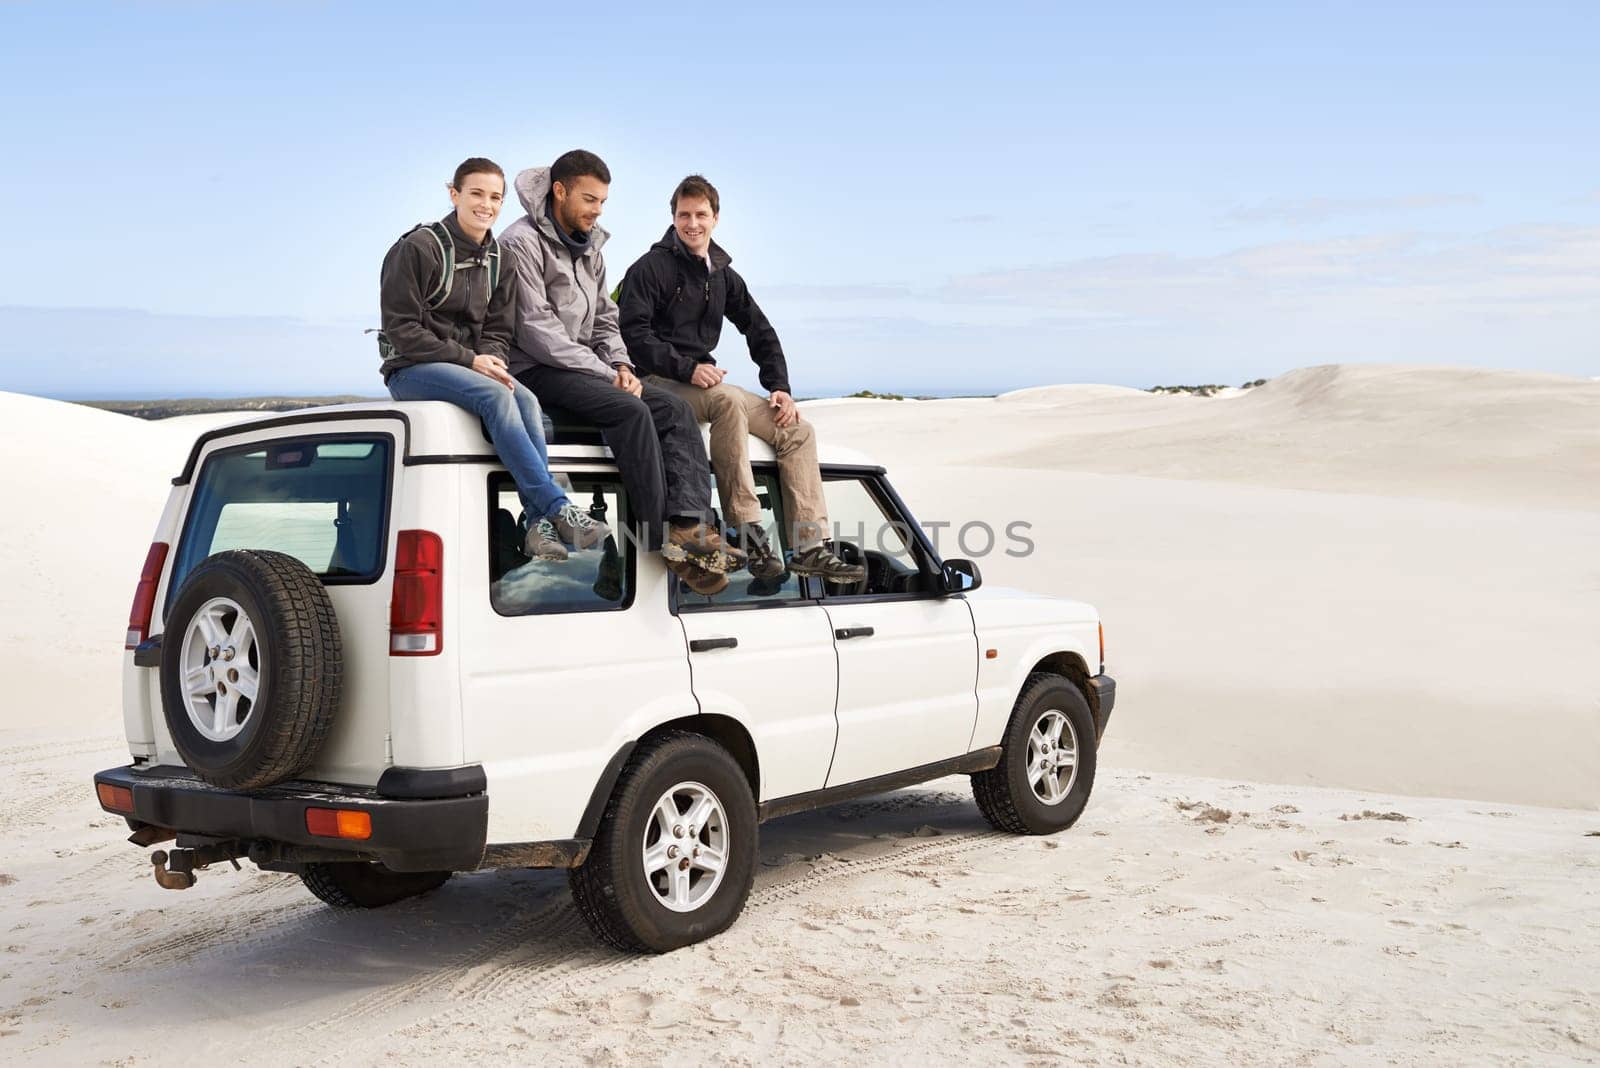 Car, adventure and friends sitting on roof for road trip break, travel and off road drive in sand dune. Relax, transportation and people in nature for getaway, summer vacation and journey in Mexico.